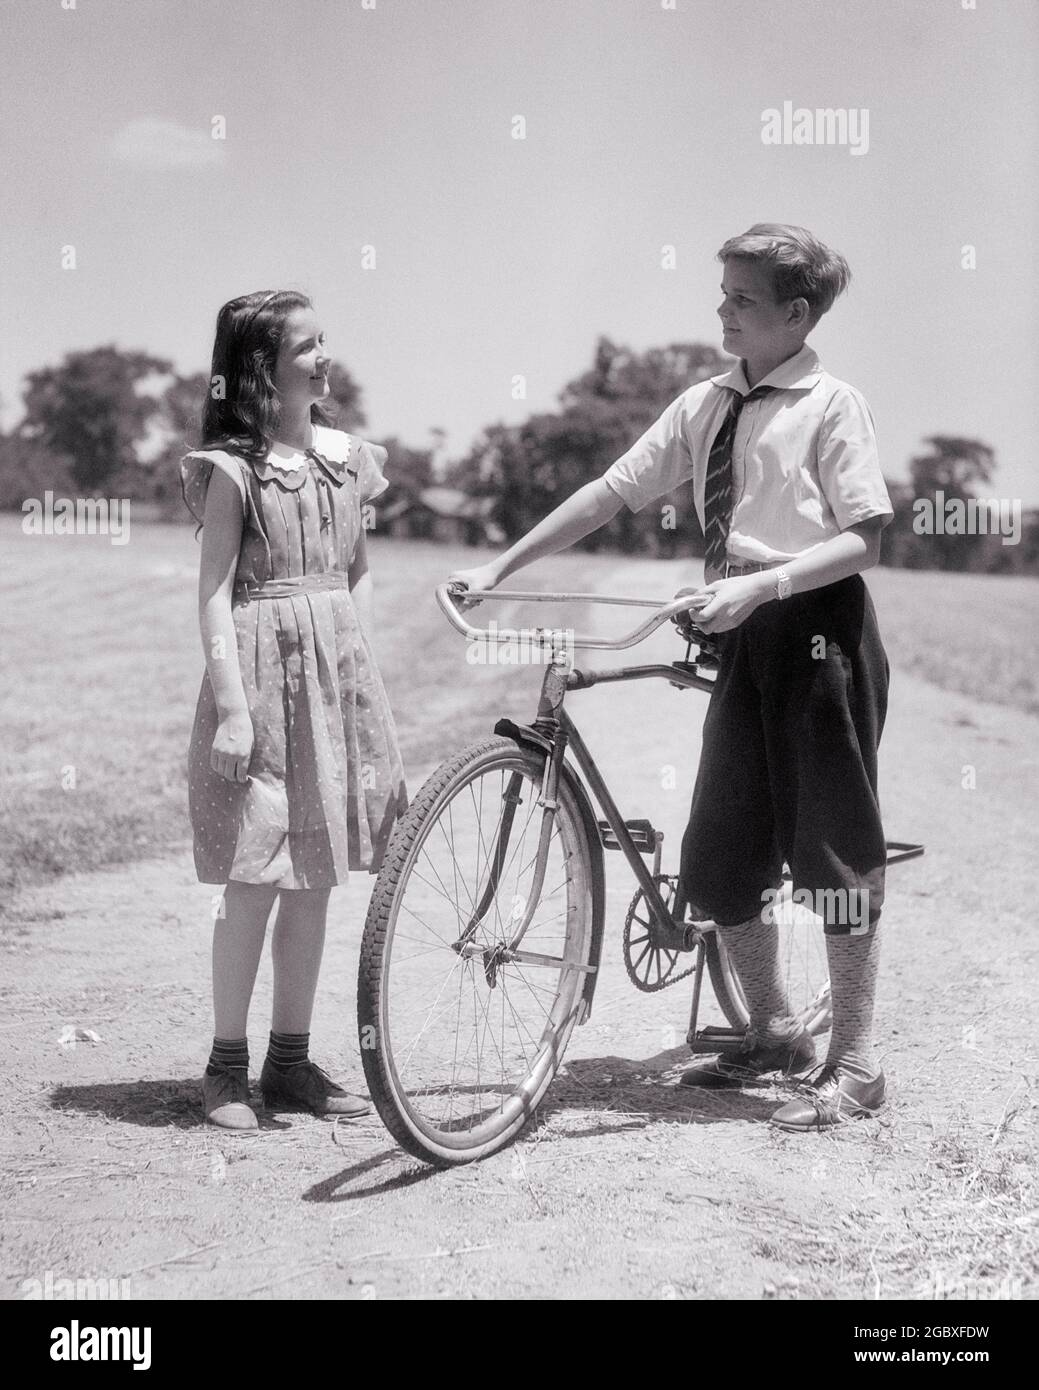 1940s SMILING PRE-TEEN GIRL SISTER TALKING WITH OLDER BROTHER WEARING KNICKERBOCKERS STANDING HOLDING BICYCLE ON PARK PATH - b14498 HAR001 HARS 1 FITNESS JUVENILE STYLE COMMUNICATION HEALTHY BALANCE PANTS KNICKERS JOY LIFESTYLE FEMALES BROTHERS BIKING HEALTHINESS COPY SPACE FRIENDSHIP FULL-LENGTH PERSONS CARING MALES SIBLINGS CONFIDENCE BICYCLES SISTERS TRANSPORTATION B&W BIKES ACTIVITY PATH HAPPINESS PHYSICAL WELLNESS STRENGTH TROUSERS EXCITEMENT RECREATION PRIDE ON OPPORTUNITY SIBLING TRAIL CONNECTION CONCEPTUAL FLEXIBILITY MUSCLES STYLISH KNICKERBOCKERS PLUS FOURS GROWTH PRE-TEEN Stock Photo